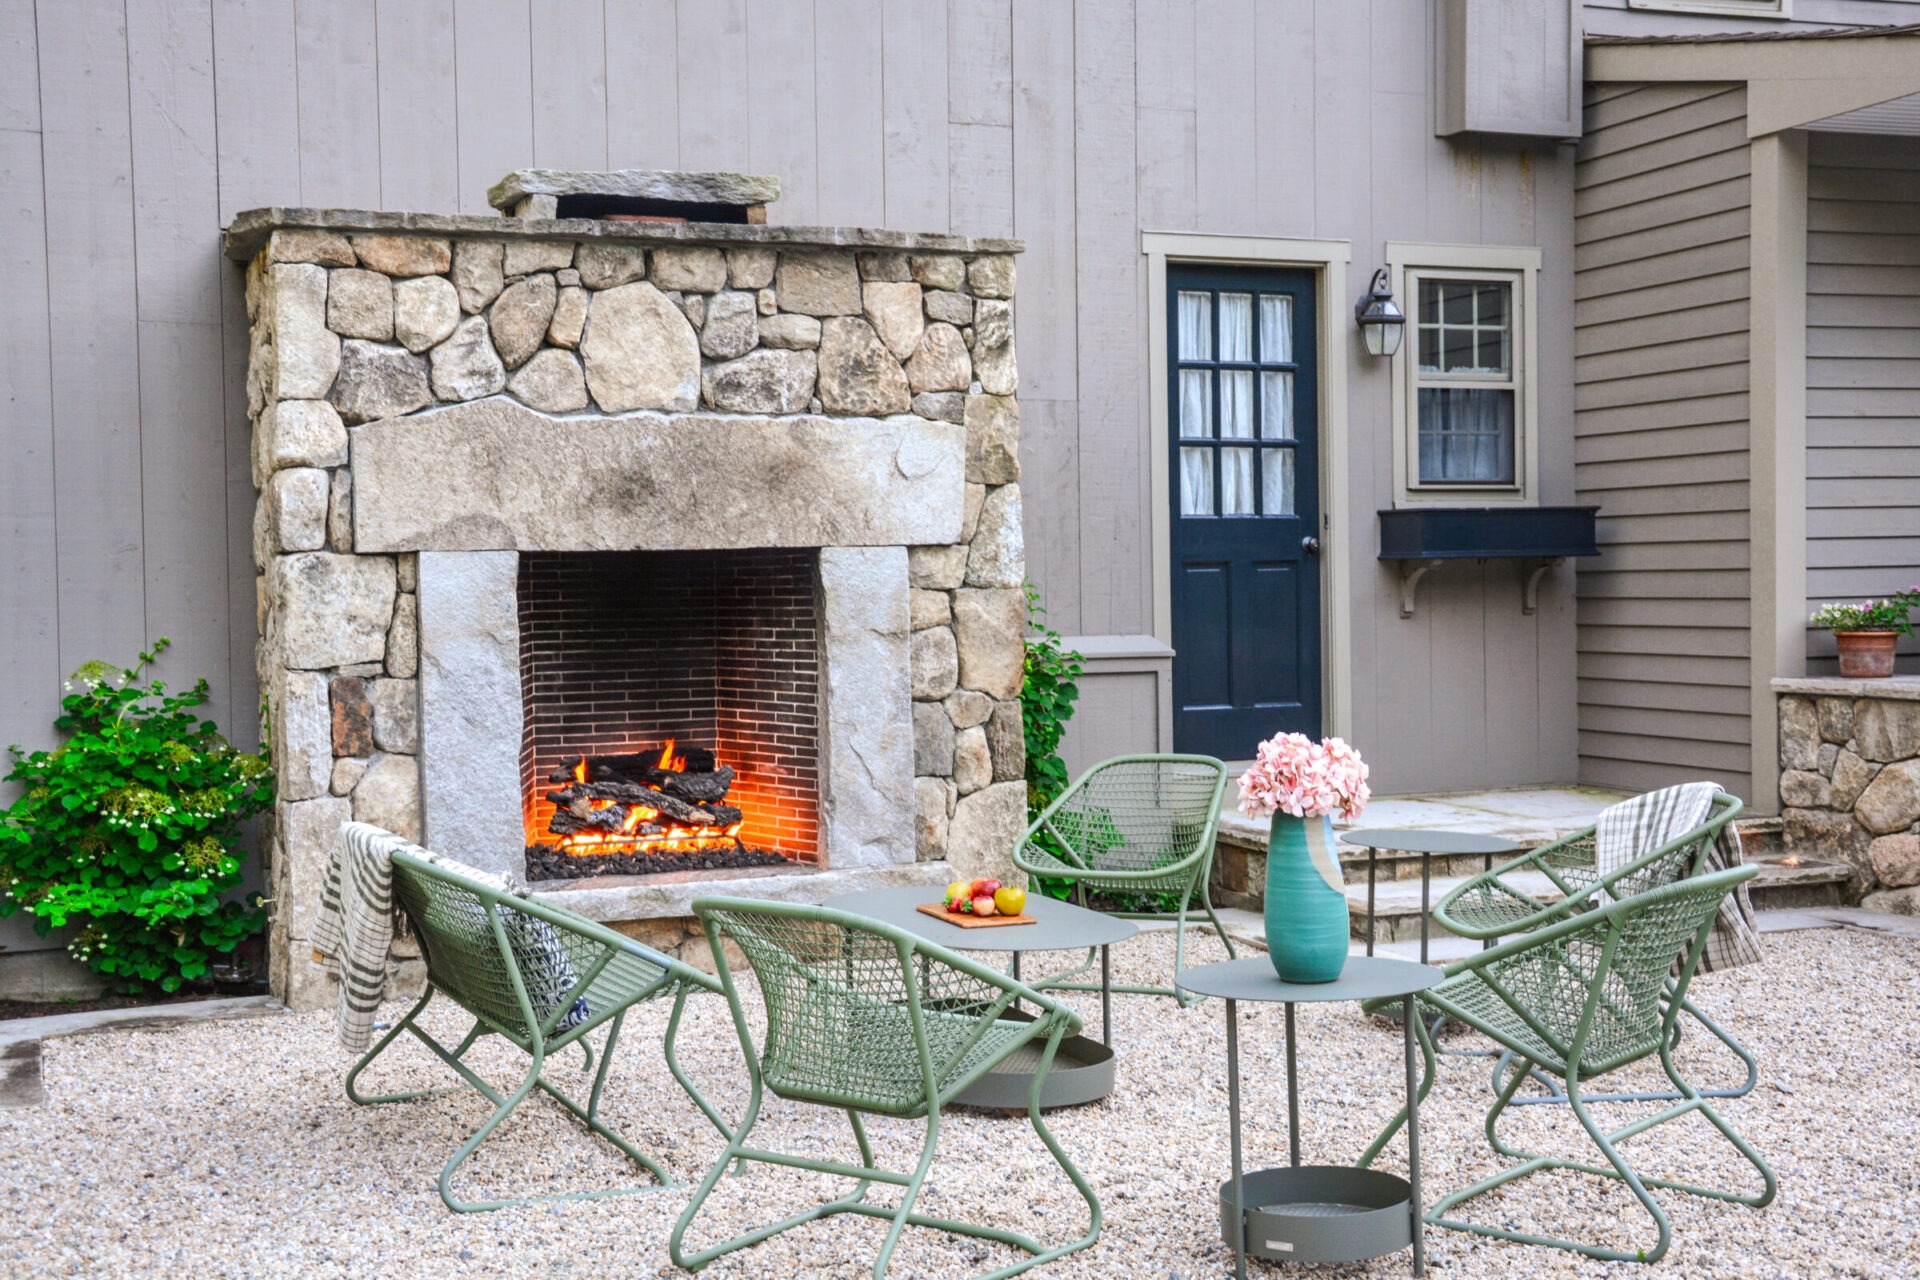 An outdoor patio with an active stone fireplace, green metal chairs, a round table, decorative flowers, and a neutral-colored building with a blue door.